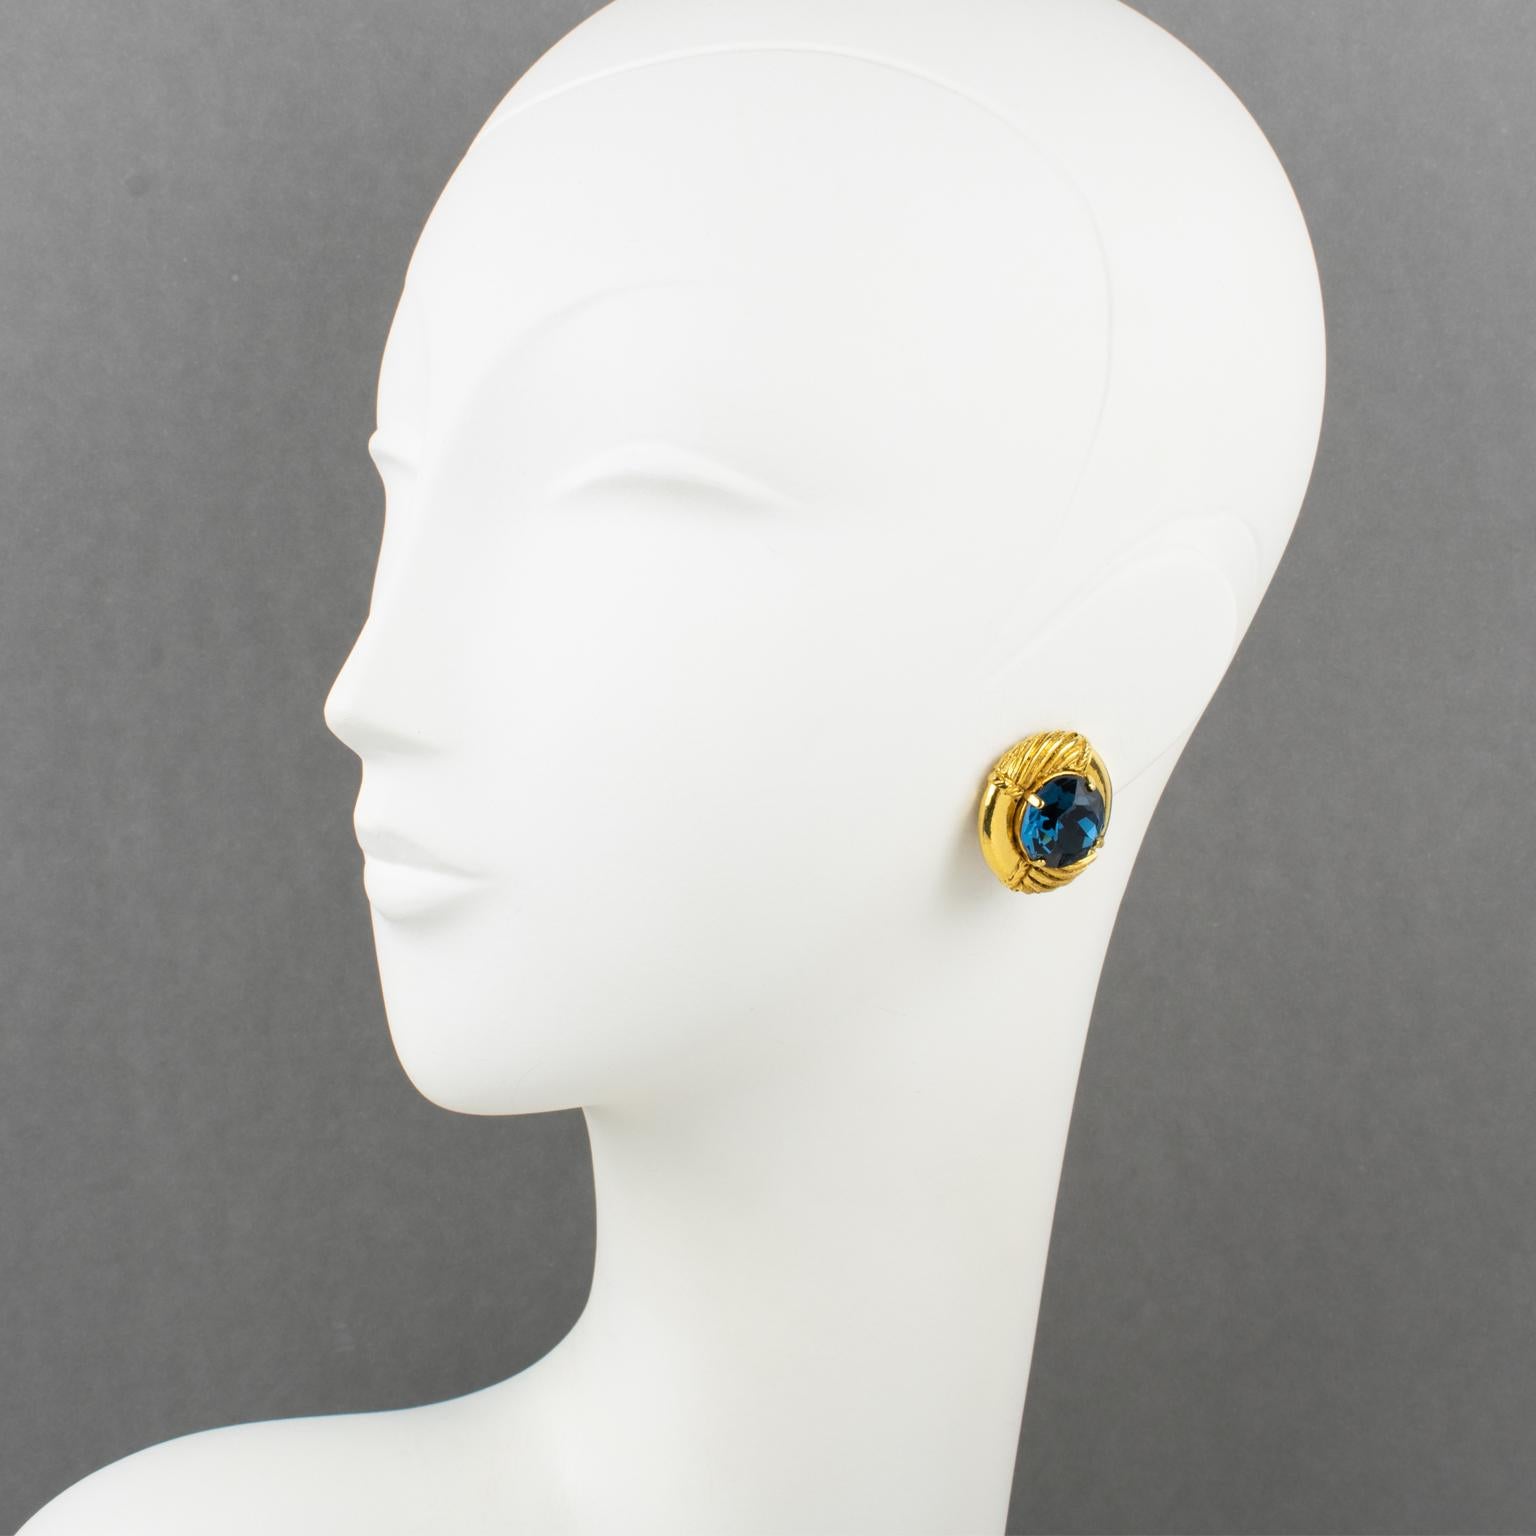 This is a remarkable pair of clip-on earrings designed by the renowned fashion house Sonia Rykiel Paris. These earrings flaunt a stunning gilt metal domed shape, boasting a textured top that showcases a large and captivating cobalt blue crystal